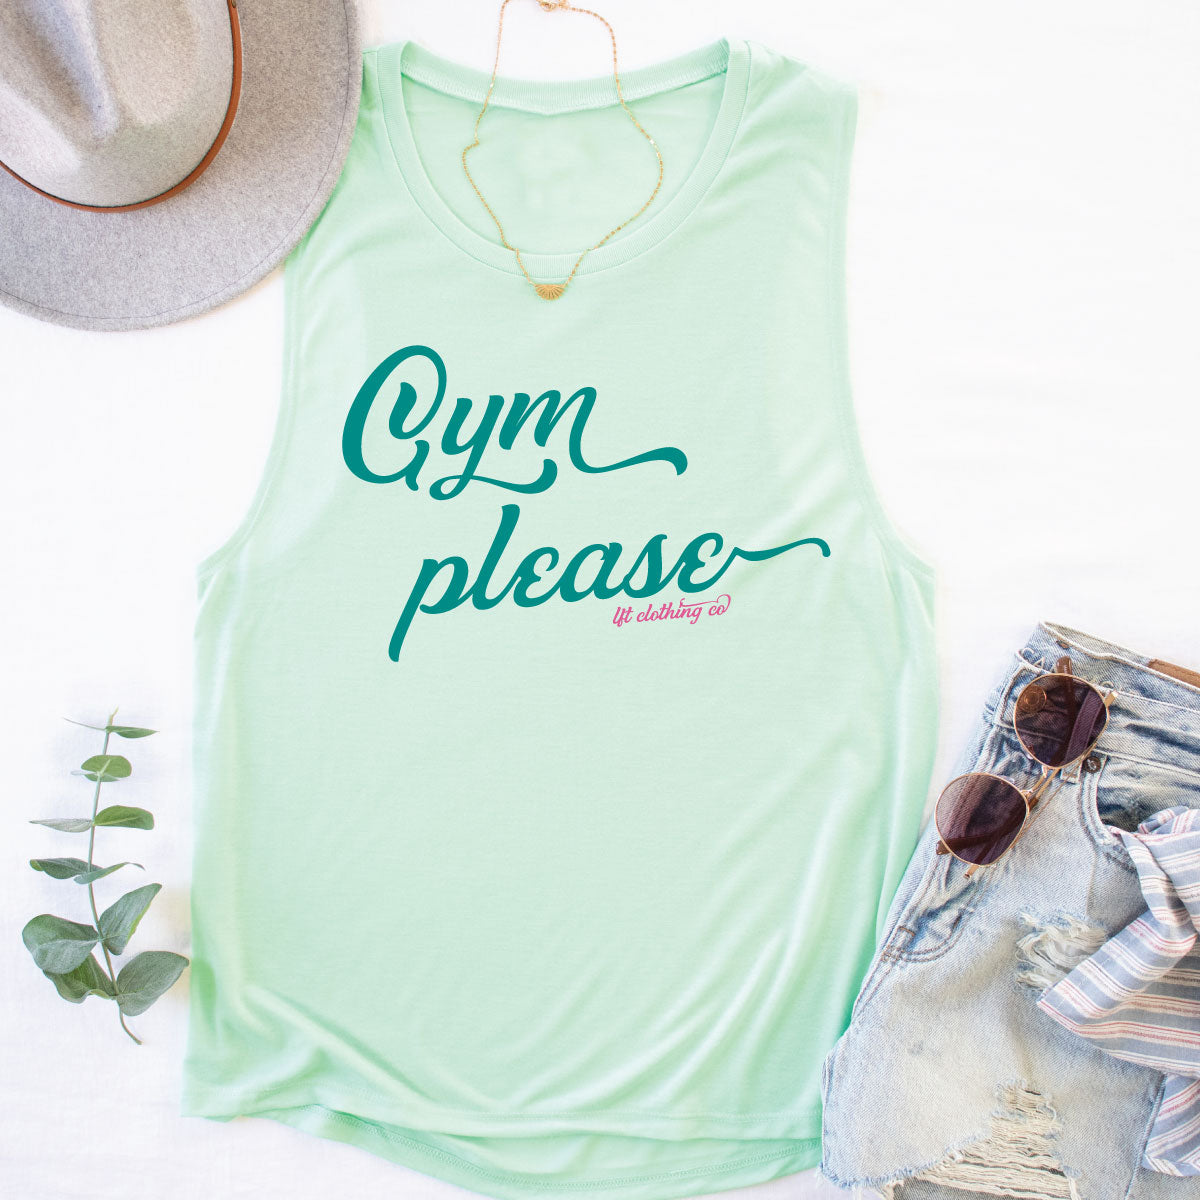 Workout Tank Women's Fitted V.I.T.™ Festival Tank - The LFT